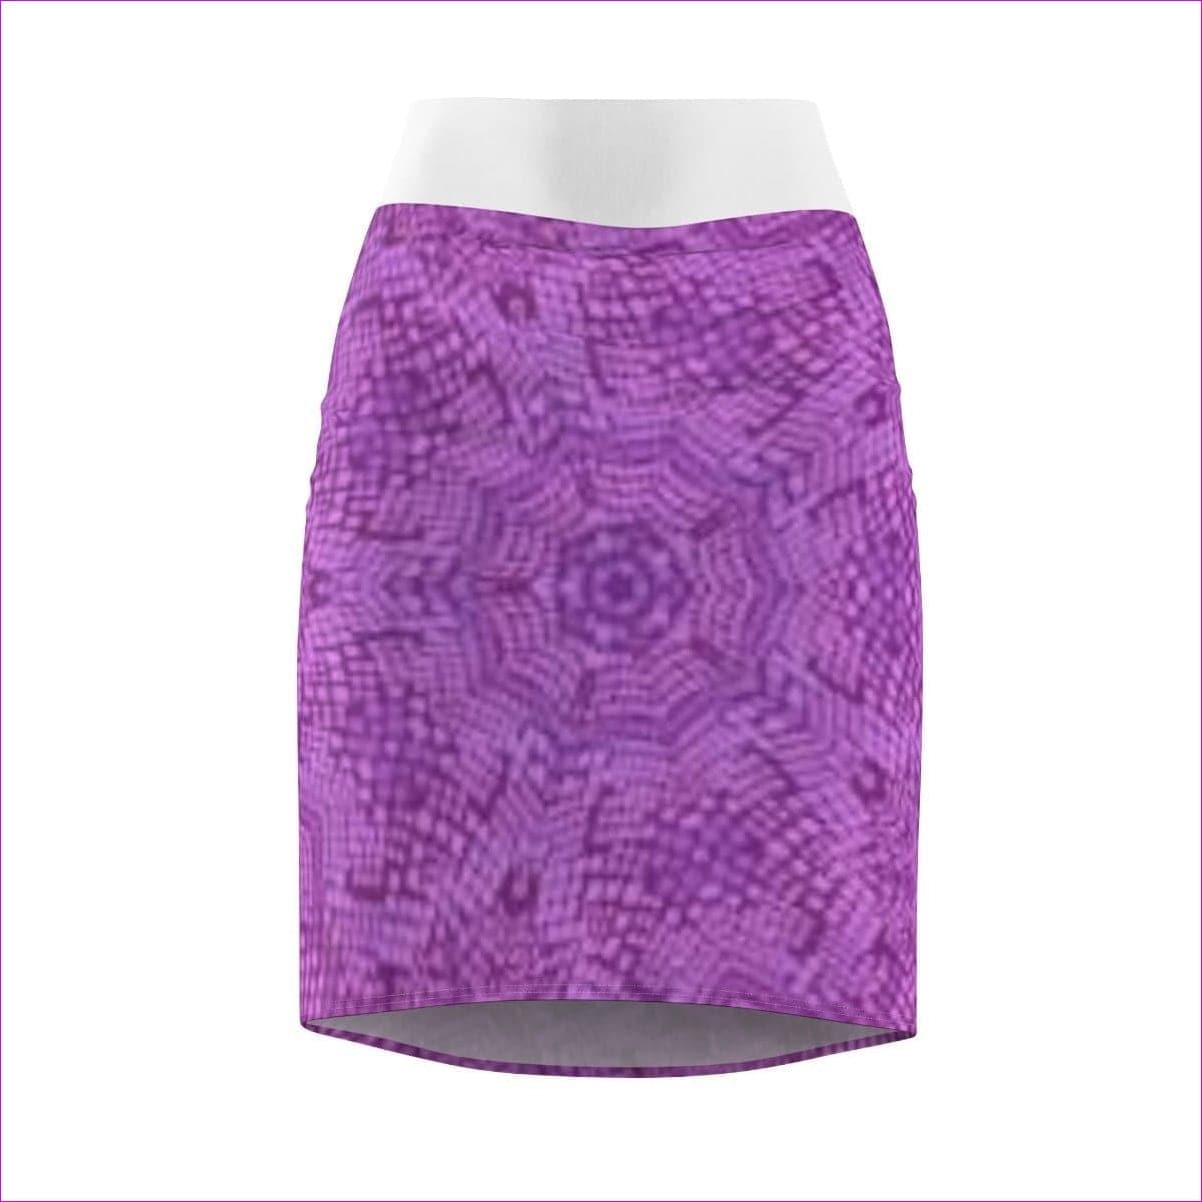 Royal Snakeskin Pencil Skirt Voluptuous (+) SIze Available- Ships from The US - women's skirt at TFC&H Co.